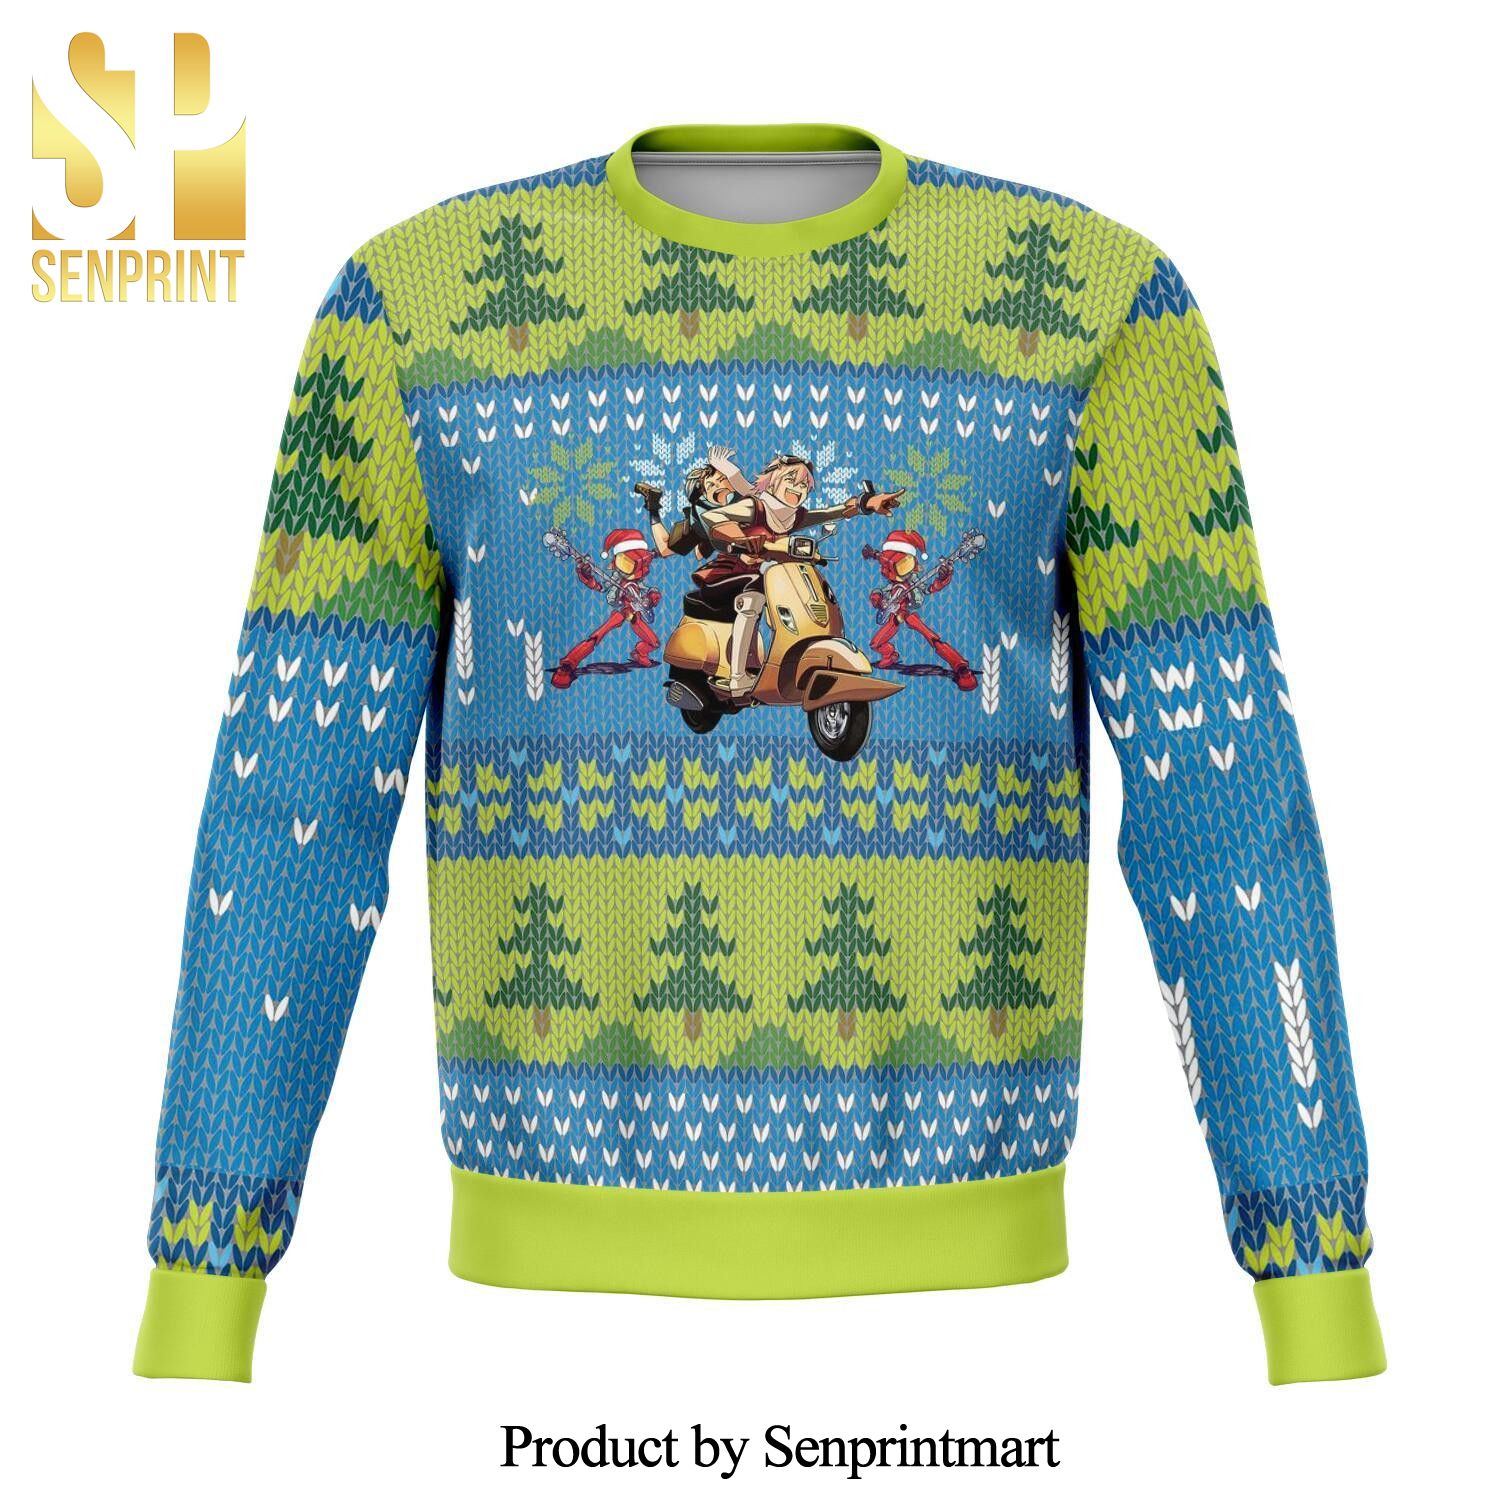 FLCL Riding Premium Manga Anime Knitted Ugly Christmas Sweater